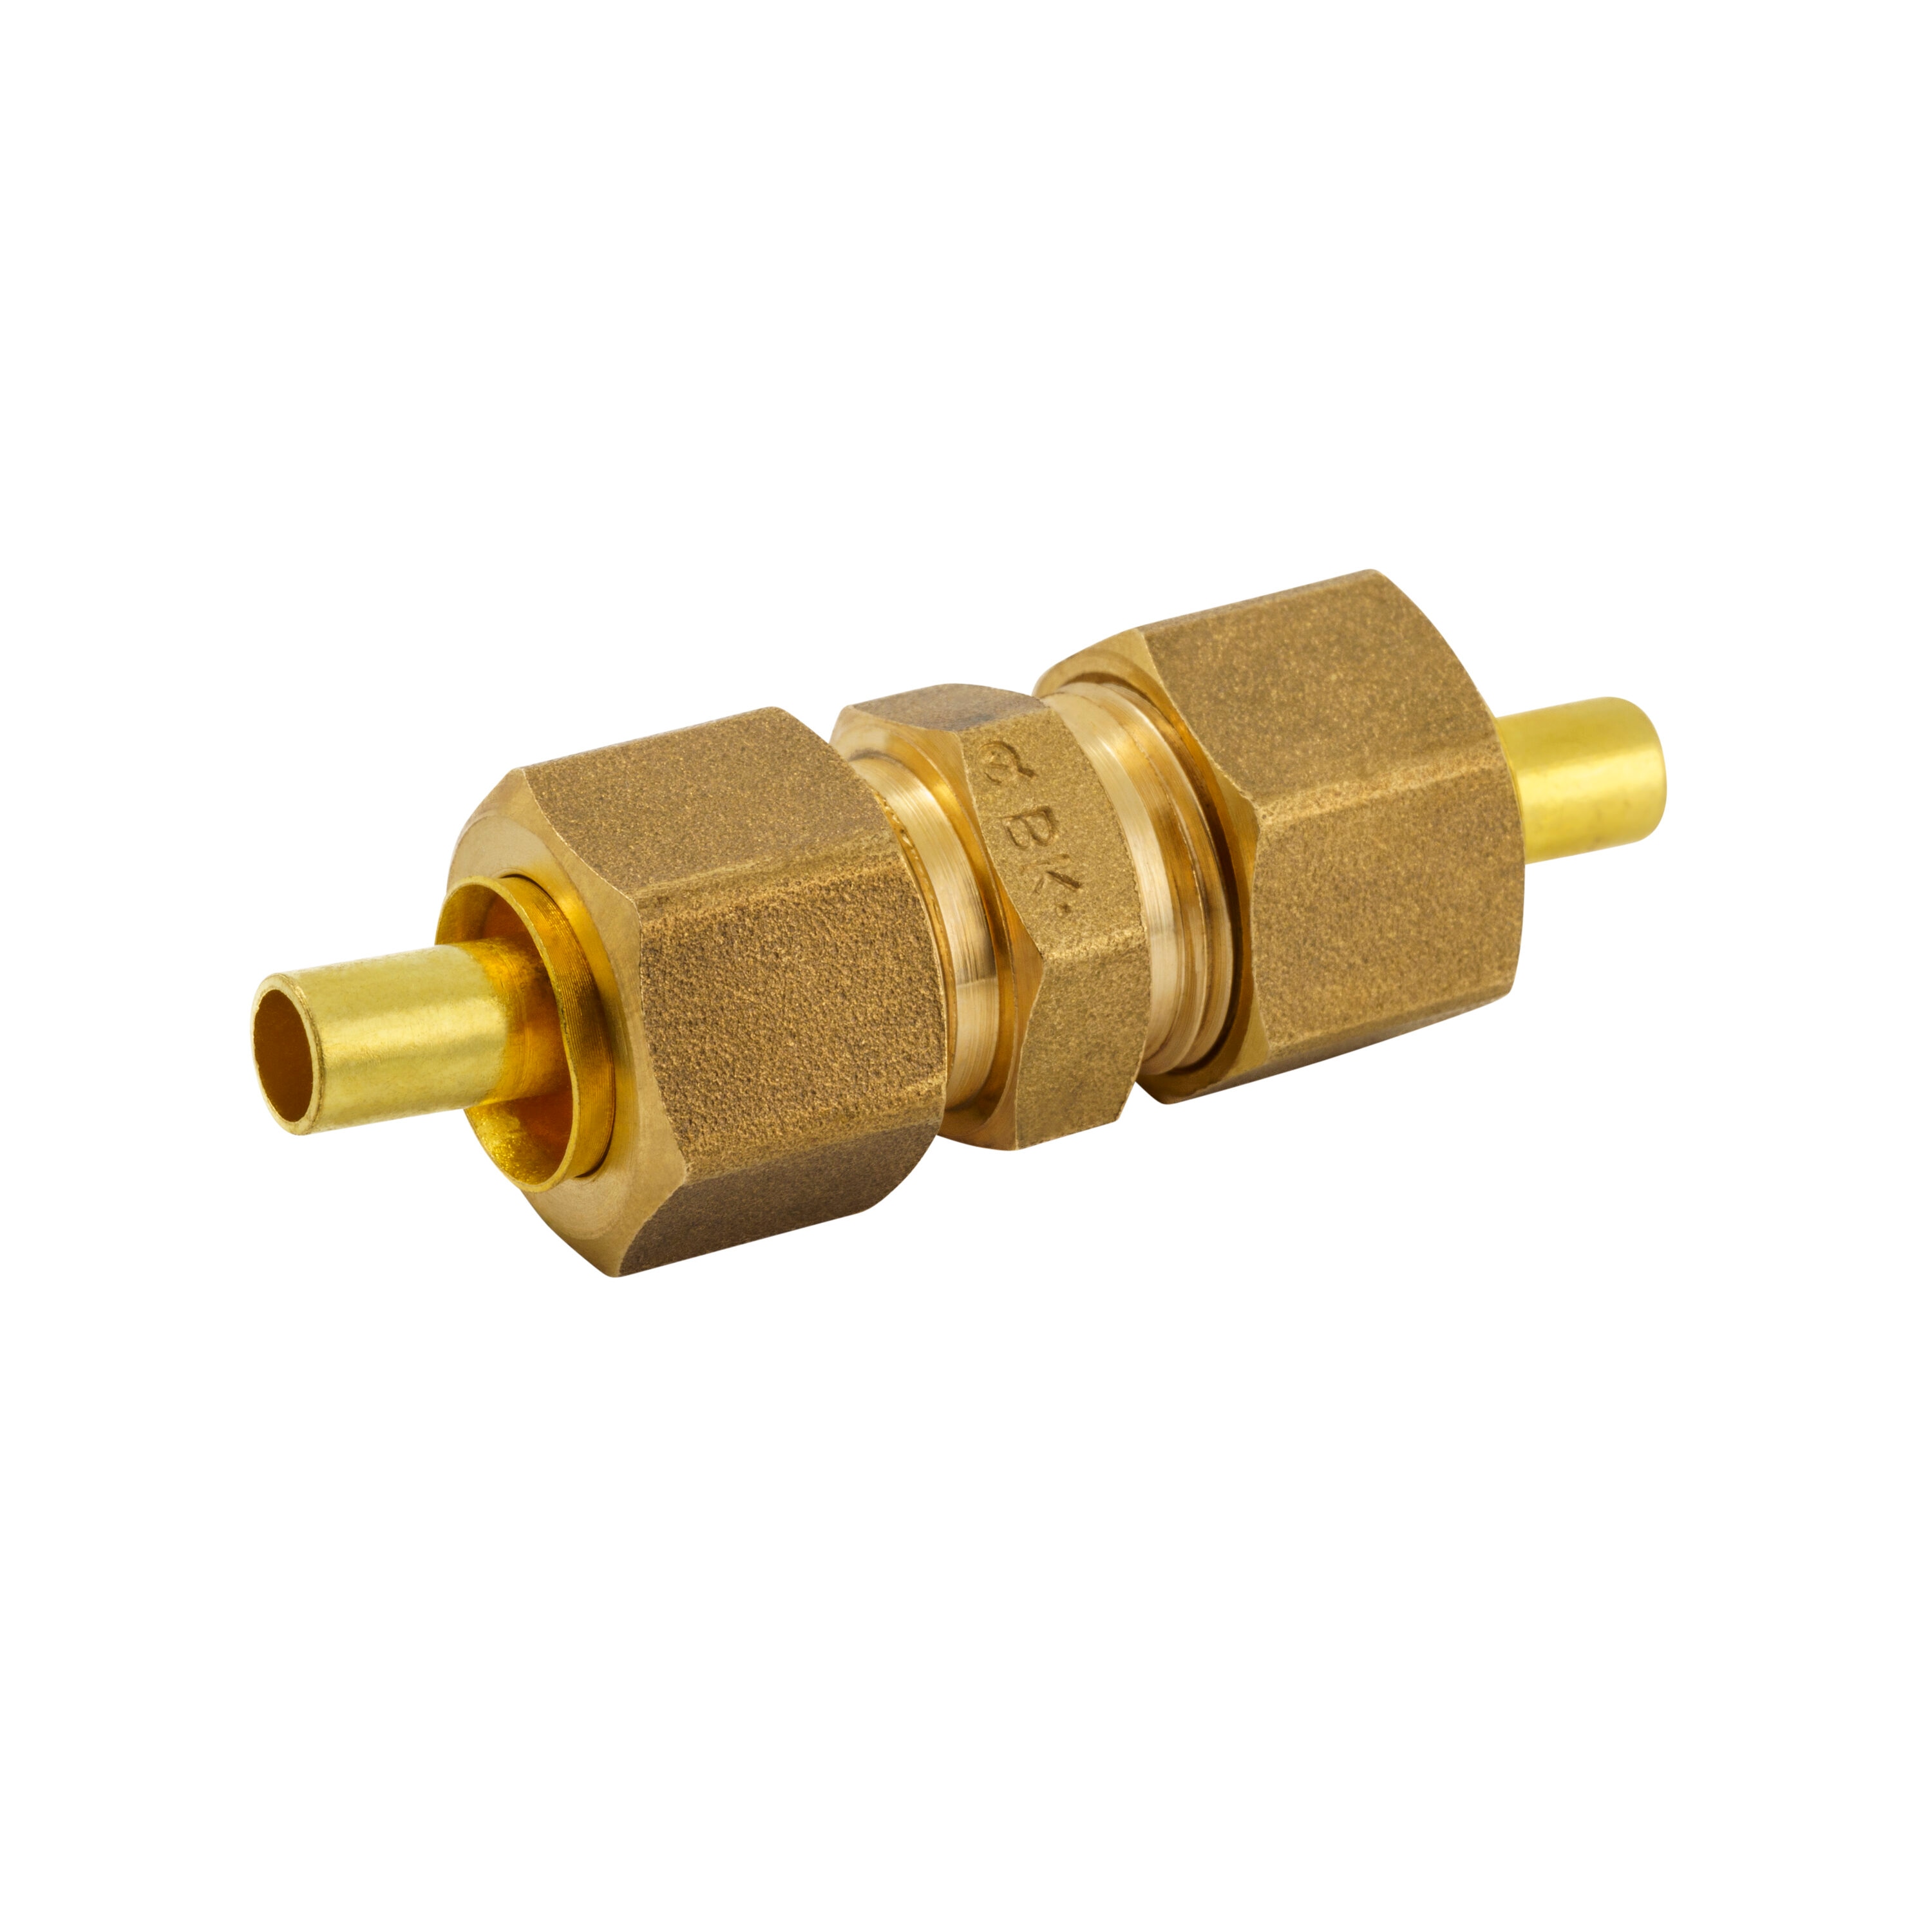 Brass Compression Repair Coupling Fitting - 22mm - On-Demand Supplies